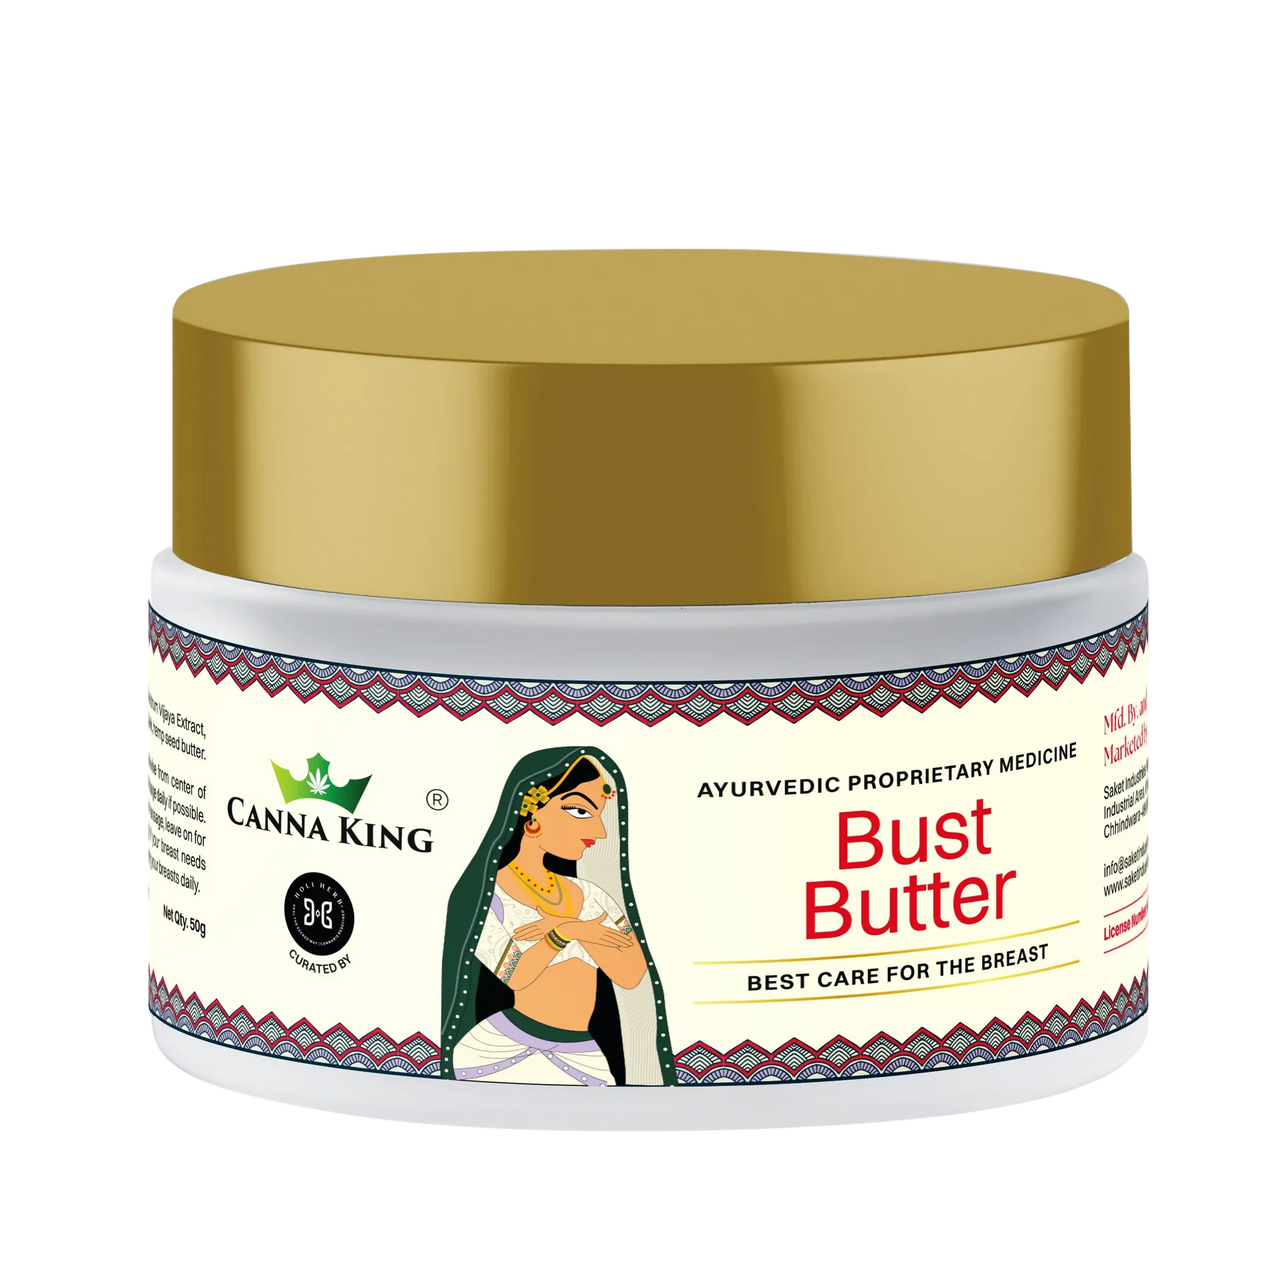 Cannaking- Bust Butter: Best Care For The Breast- 50g